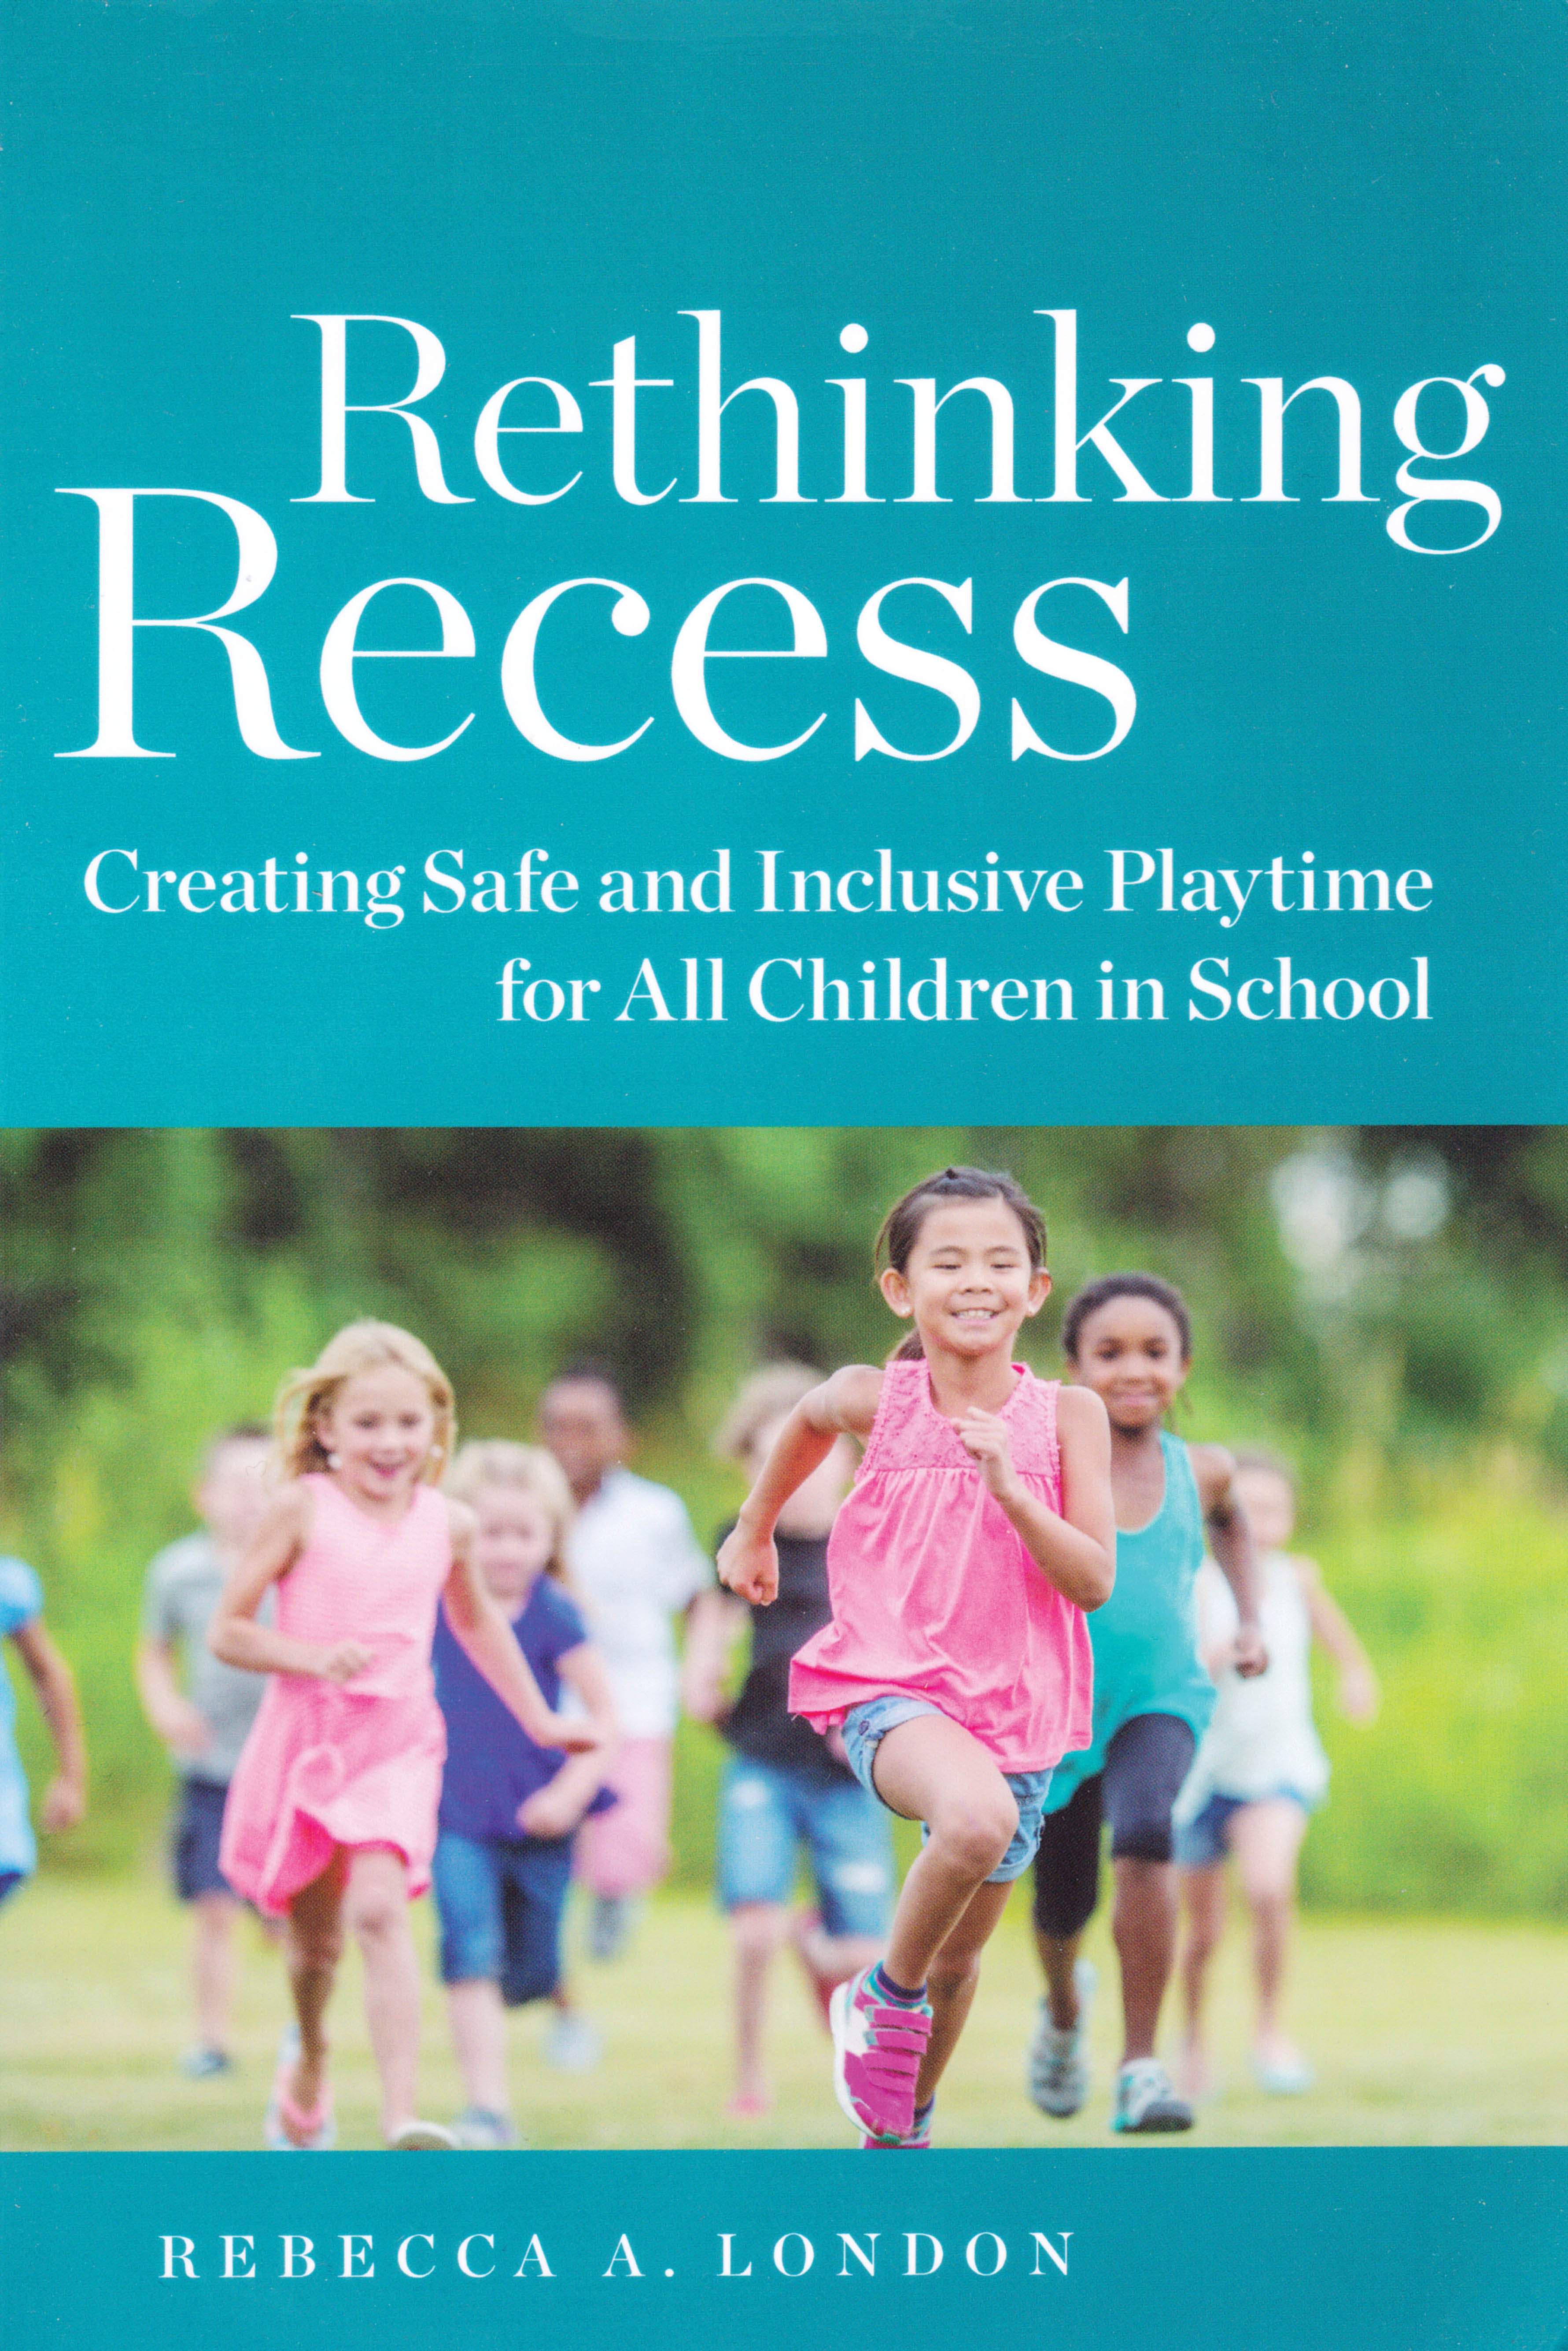 'Rethinking Recess' book cover.